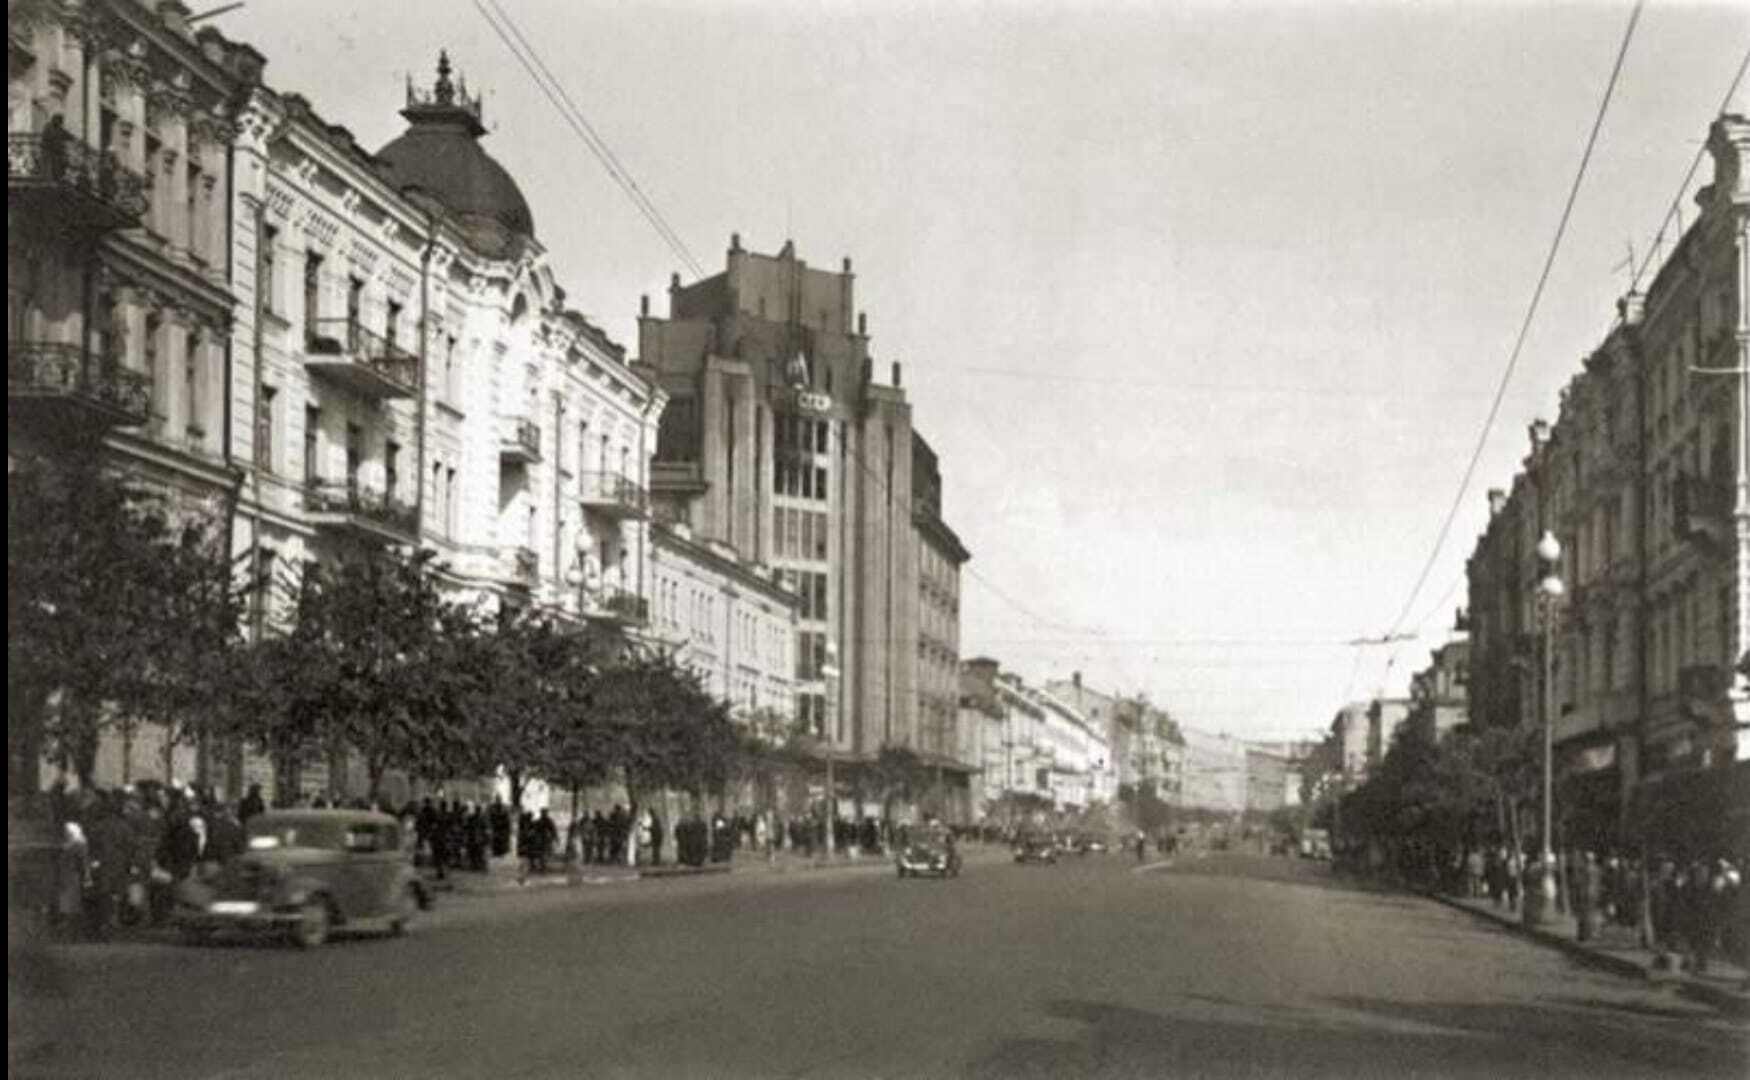 Khreshchatyk in Kyiv before the outbreak of World War II: cinemas, a tram, and even a circus. Archival photos